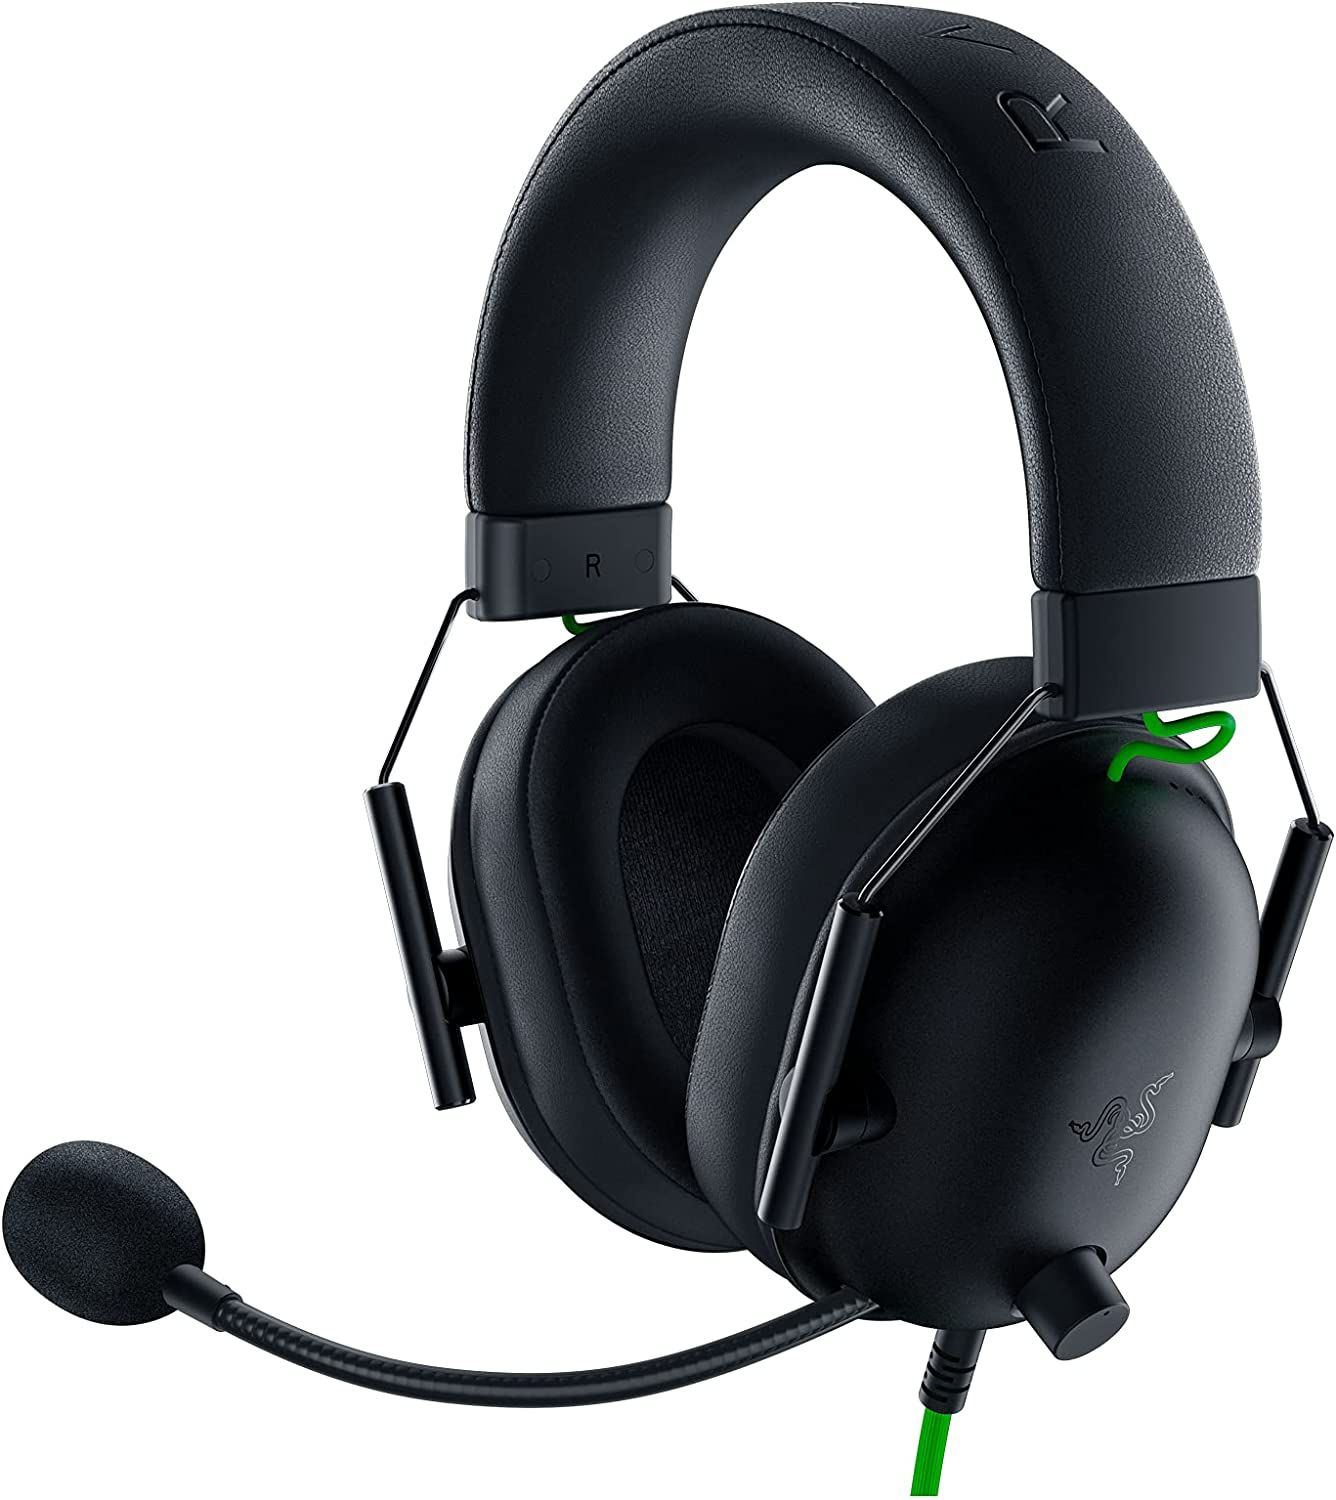 Razer Kraken Gaming Headset with Cooling Gel Earpads for Ambitious